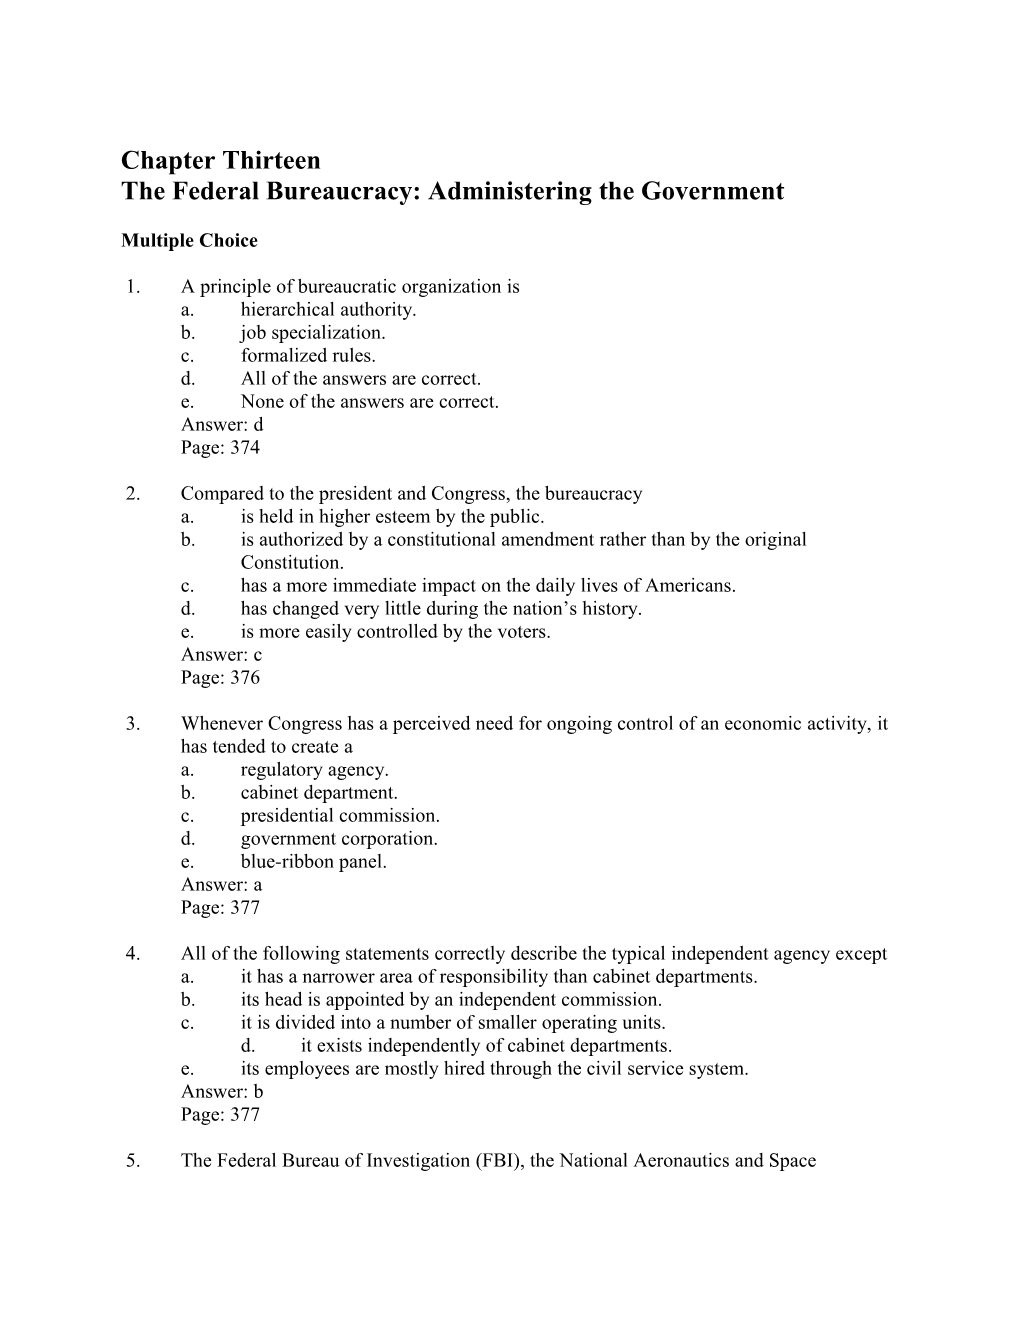 The Federal Bureaucracy: Administering The Government